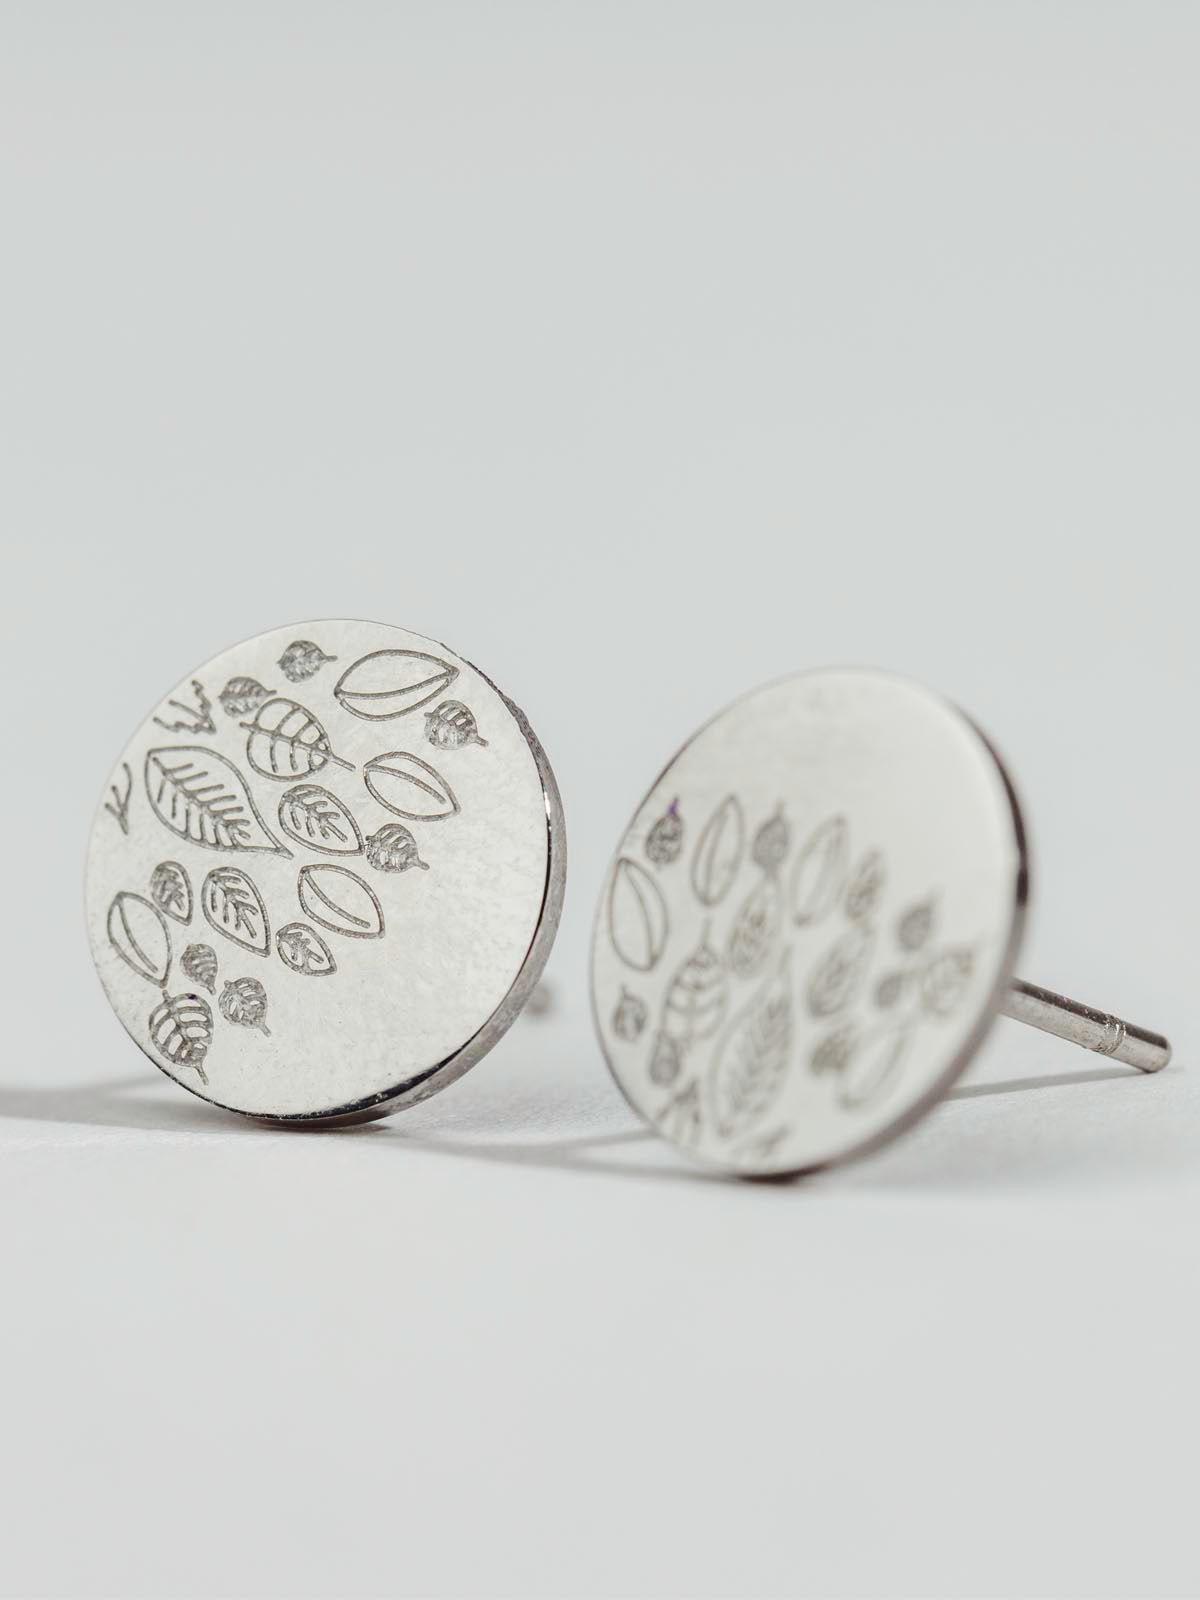 Silver studs with leave engravings sitting on white background. 